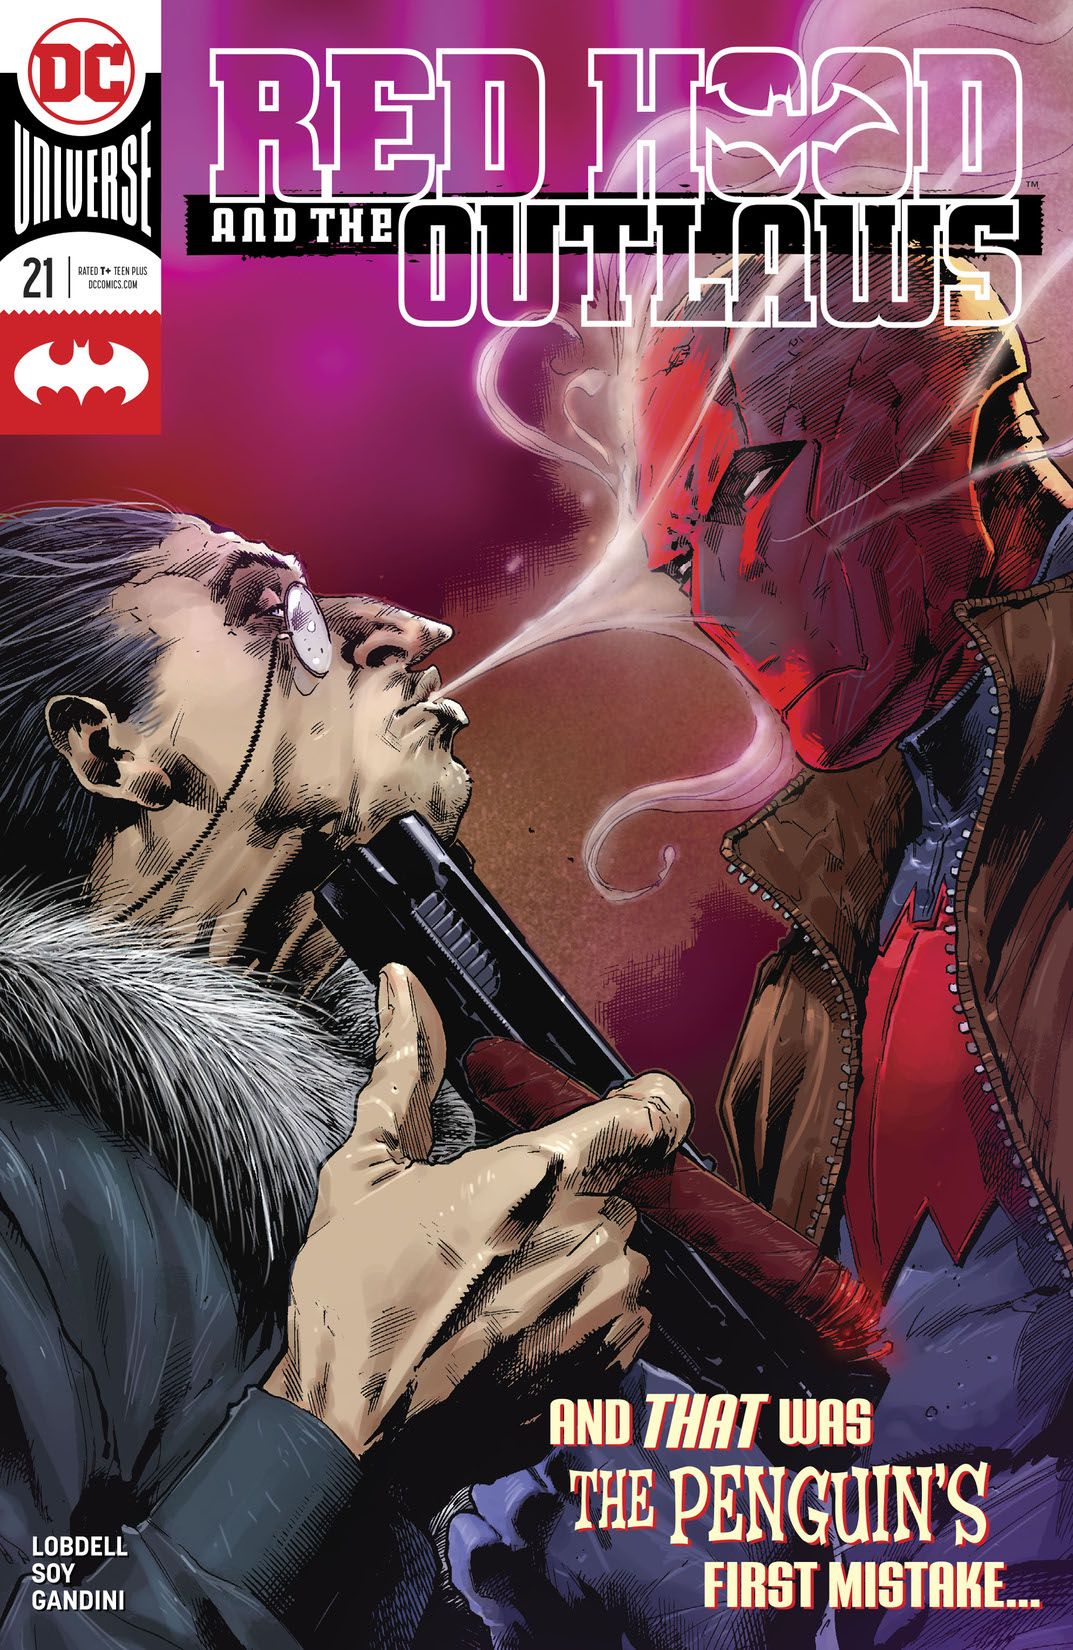 Red Hood and the Outlaws (2016-) #21 preview images